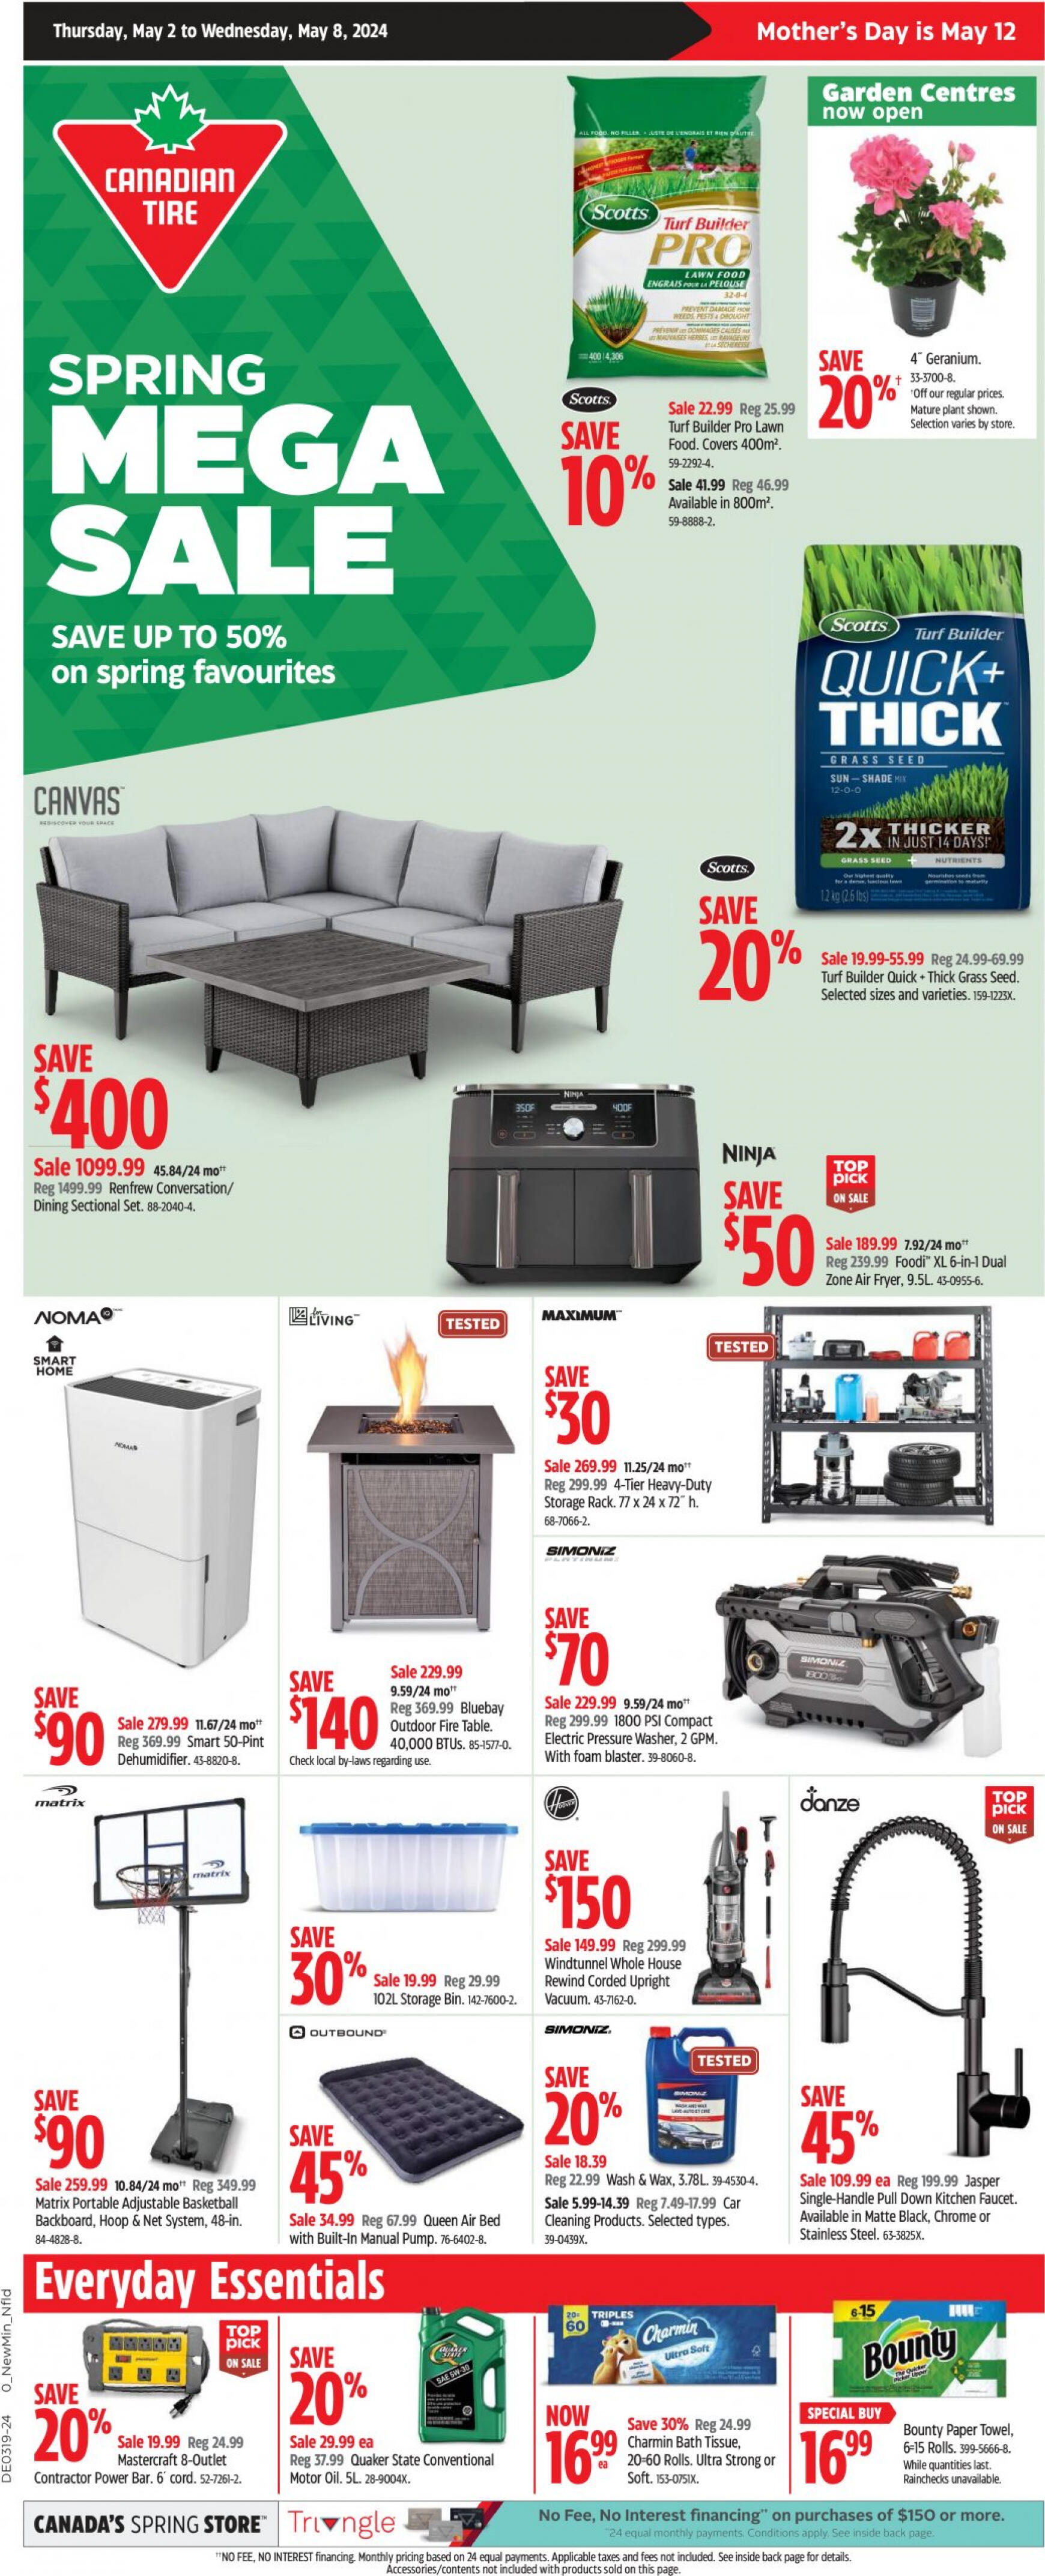 canadian-tire - Canadian Tire flyer current 02.05. - 08.05. - page: 1